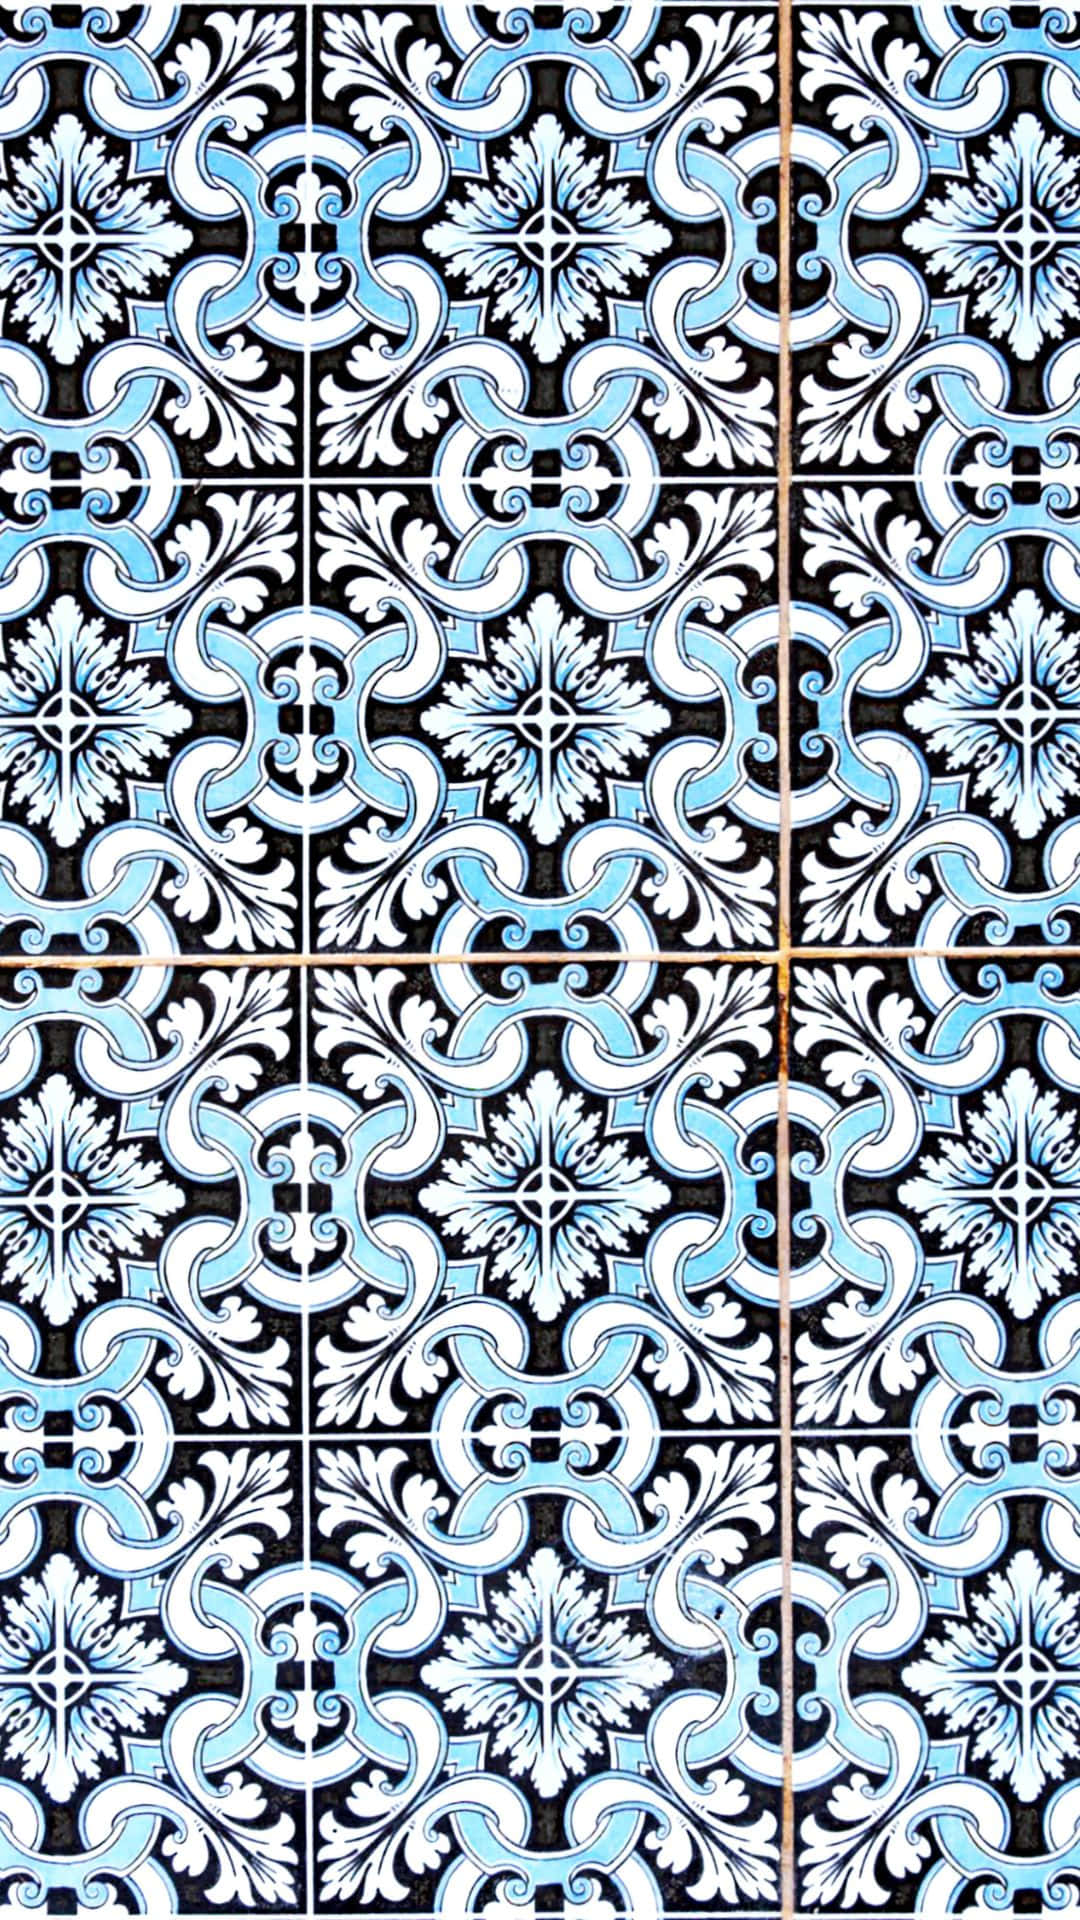 A Tile With Blue And White Designs